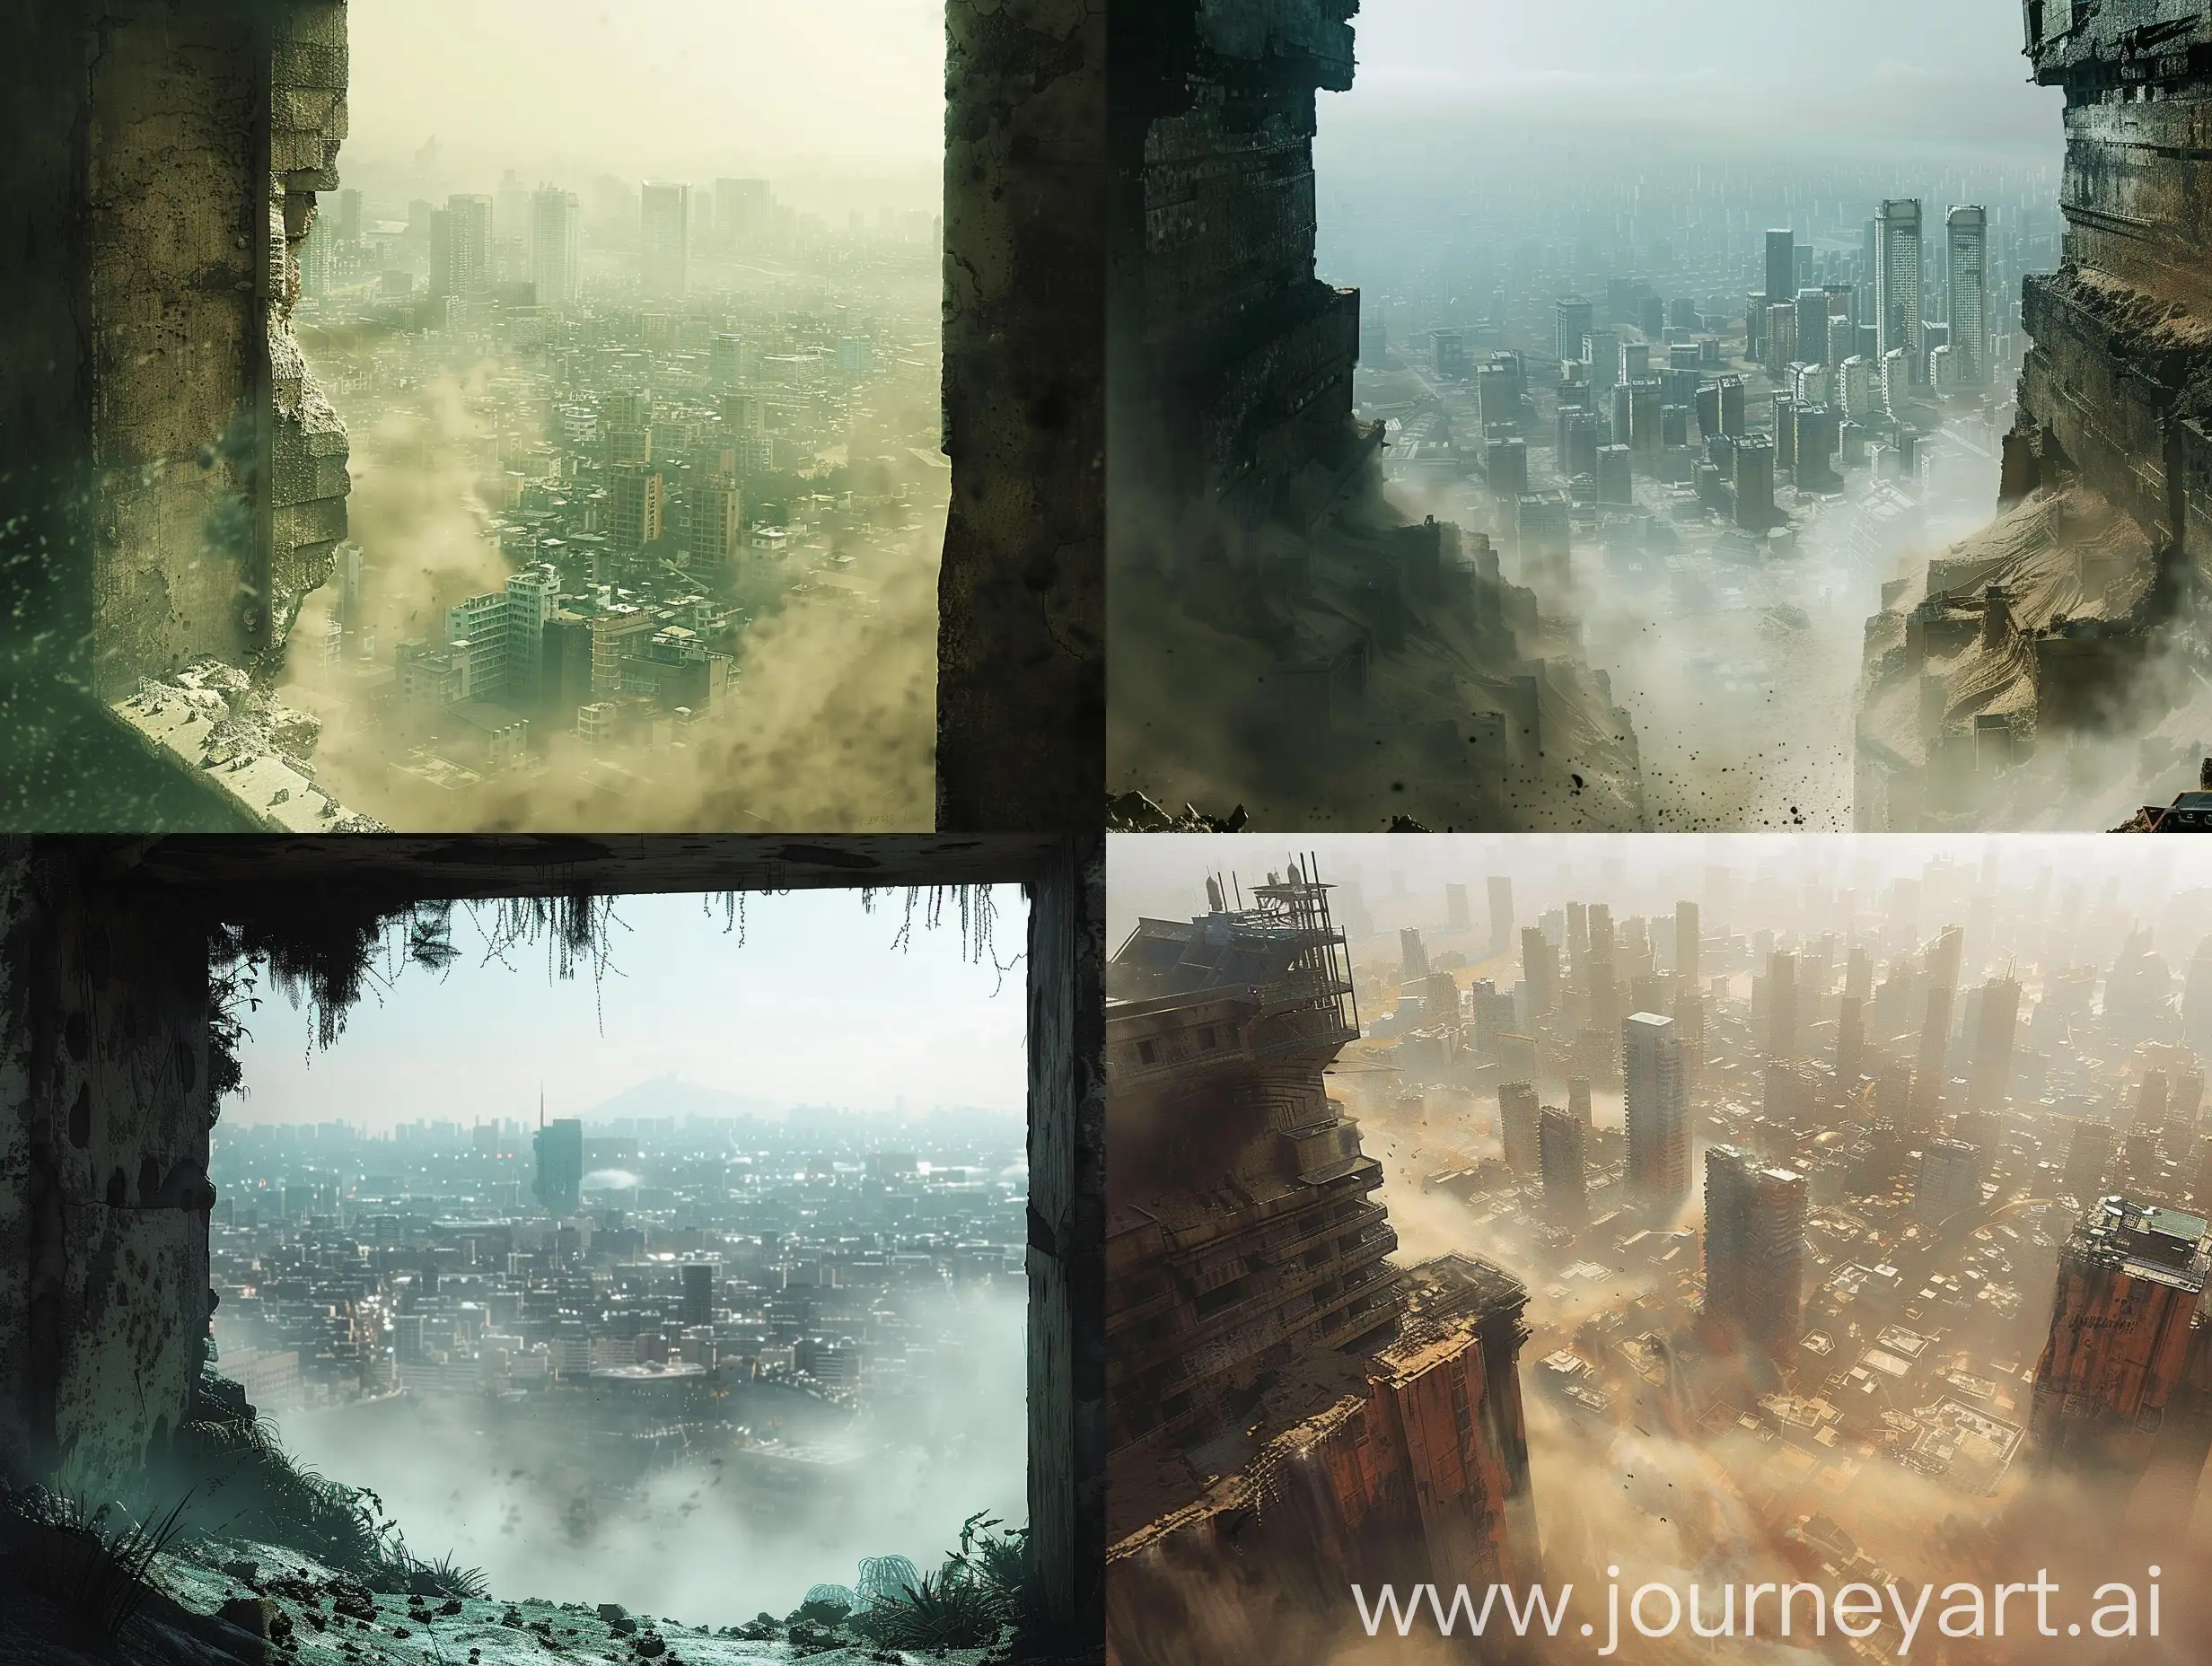 a view of a city from a like a scene from blade runner, city futuristic and clean, dust, city, reminiscent of blade runner, post apocalyptic city, city futuristic in background, city futuristic in background, foggy dystopian world, set in post apocalyptic city, looming over a city, in a tropical and dystopic city, cyberpunk city


